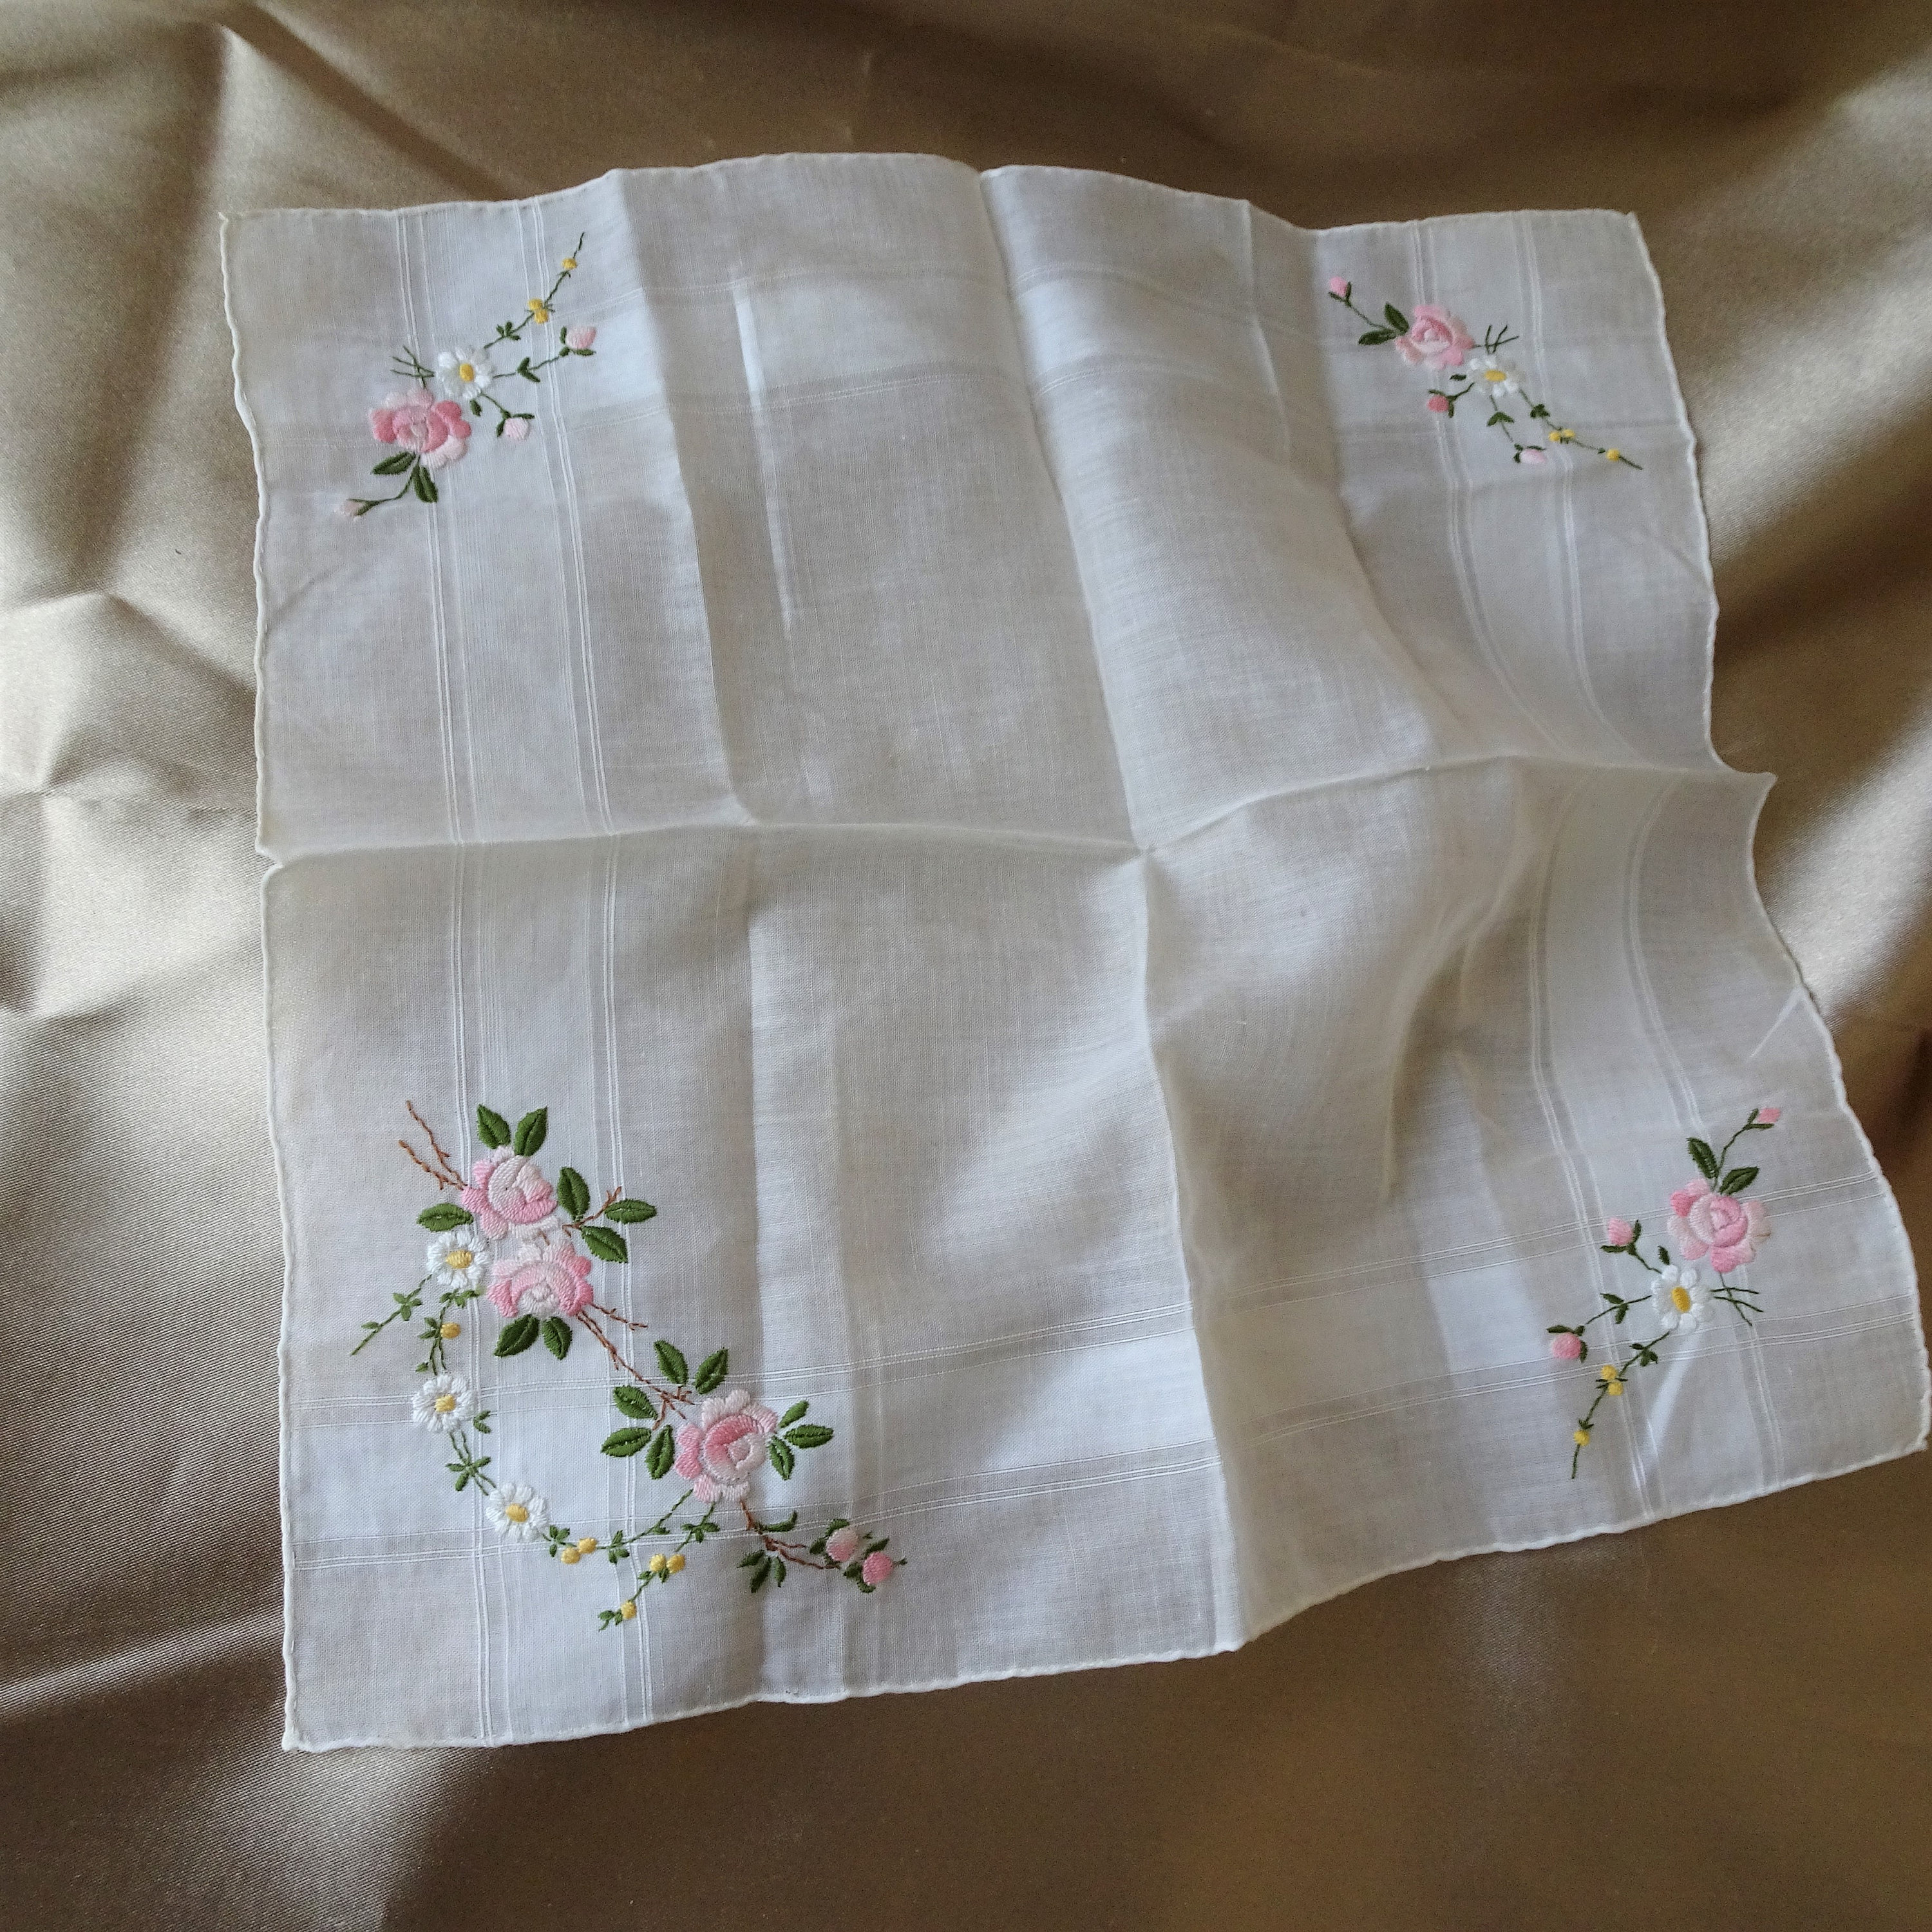 Lovely Floral Embroidered Hanky,Vintage Handkerchief, Pink Rose Buds,F